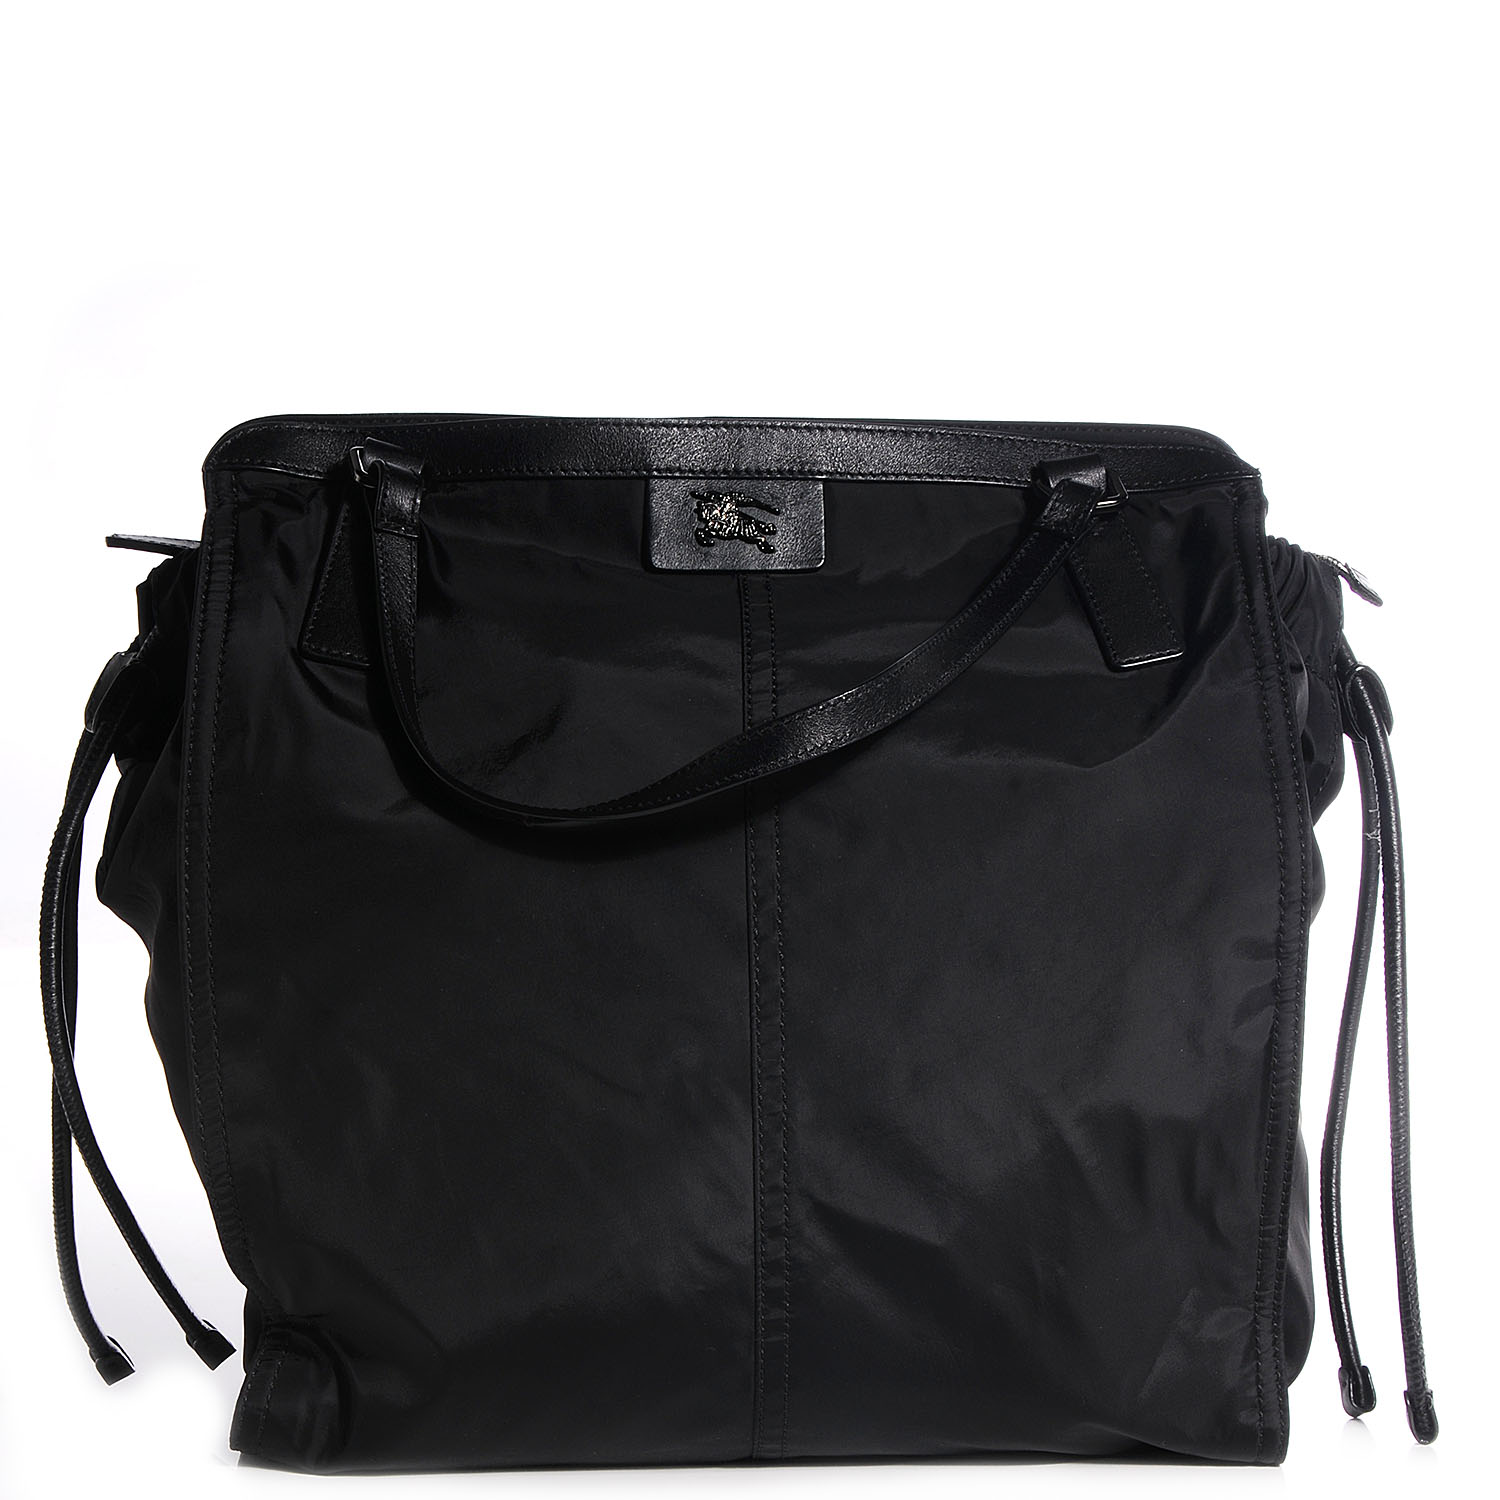 Nylon Buckleigh Packable Tote Black 